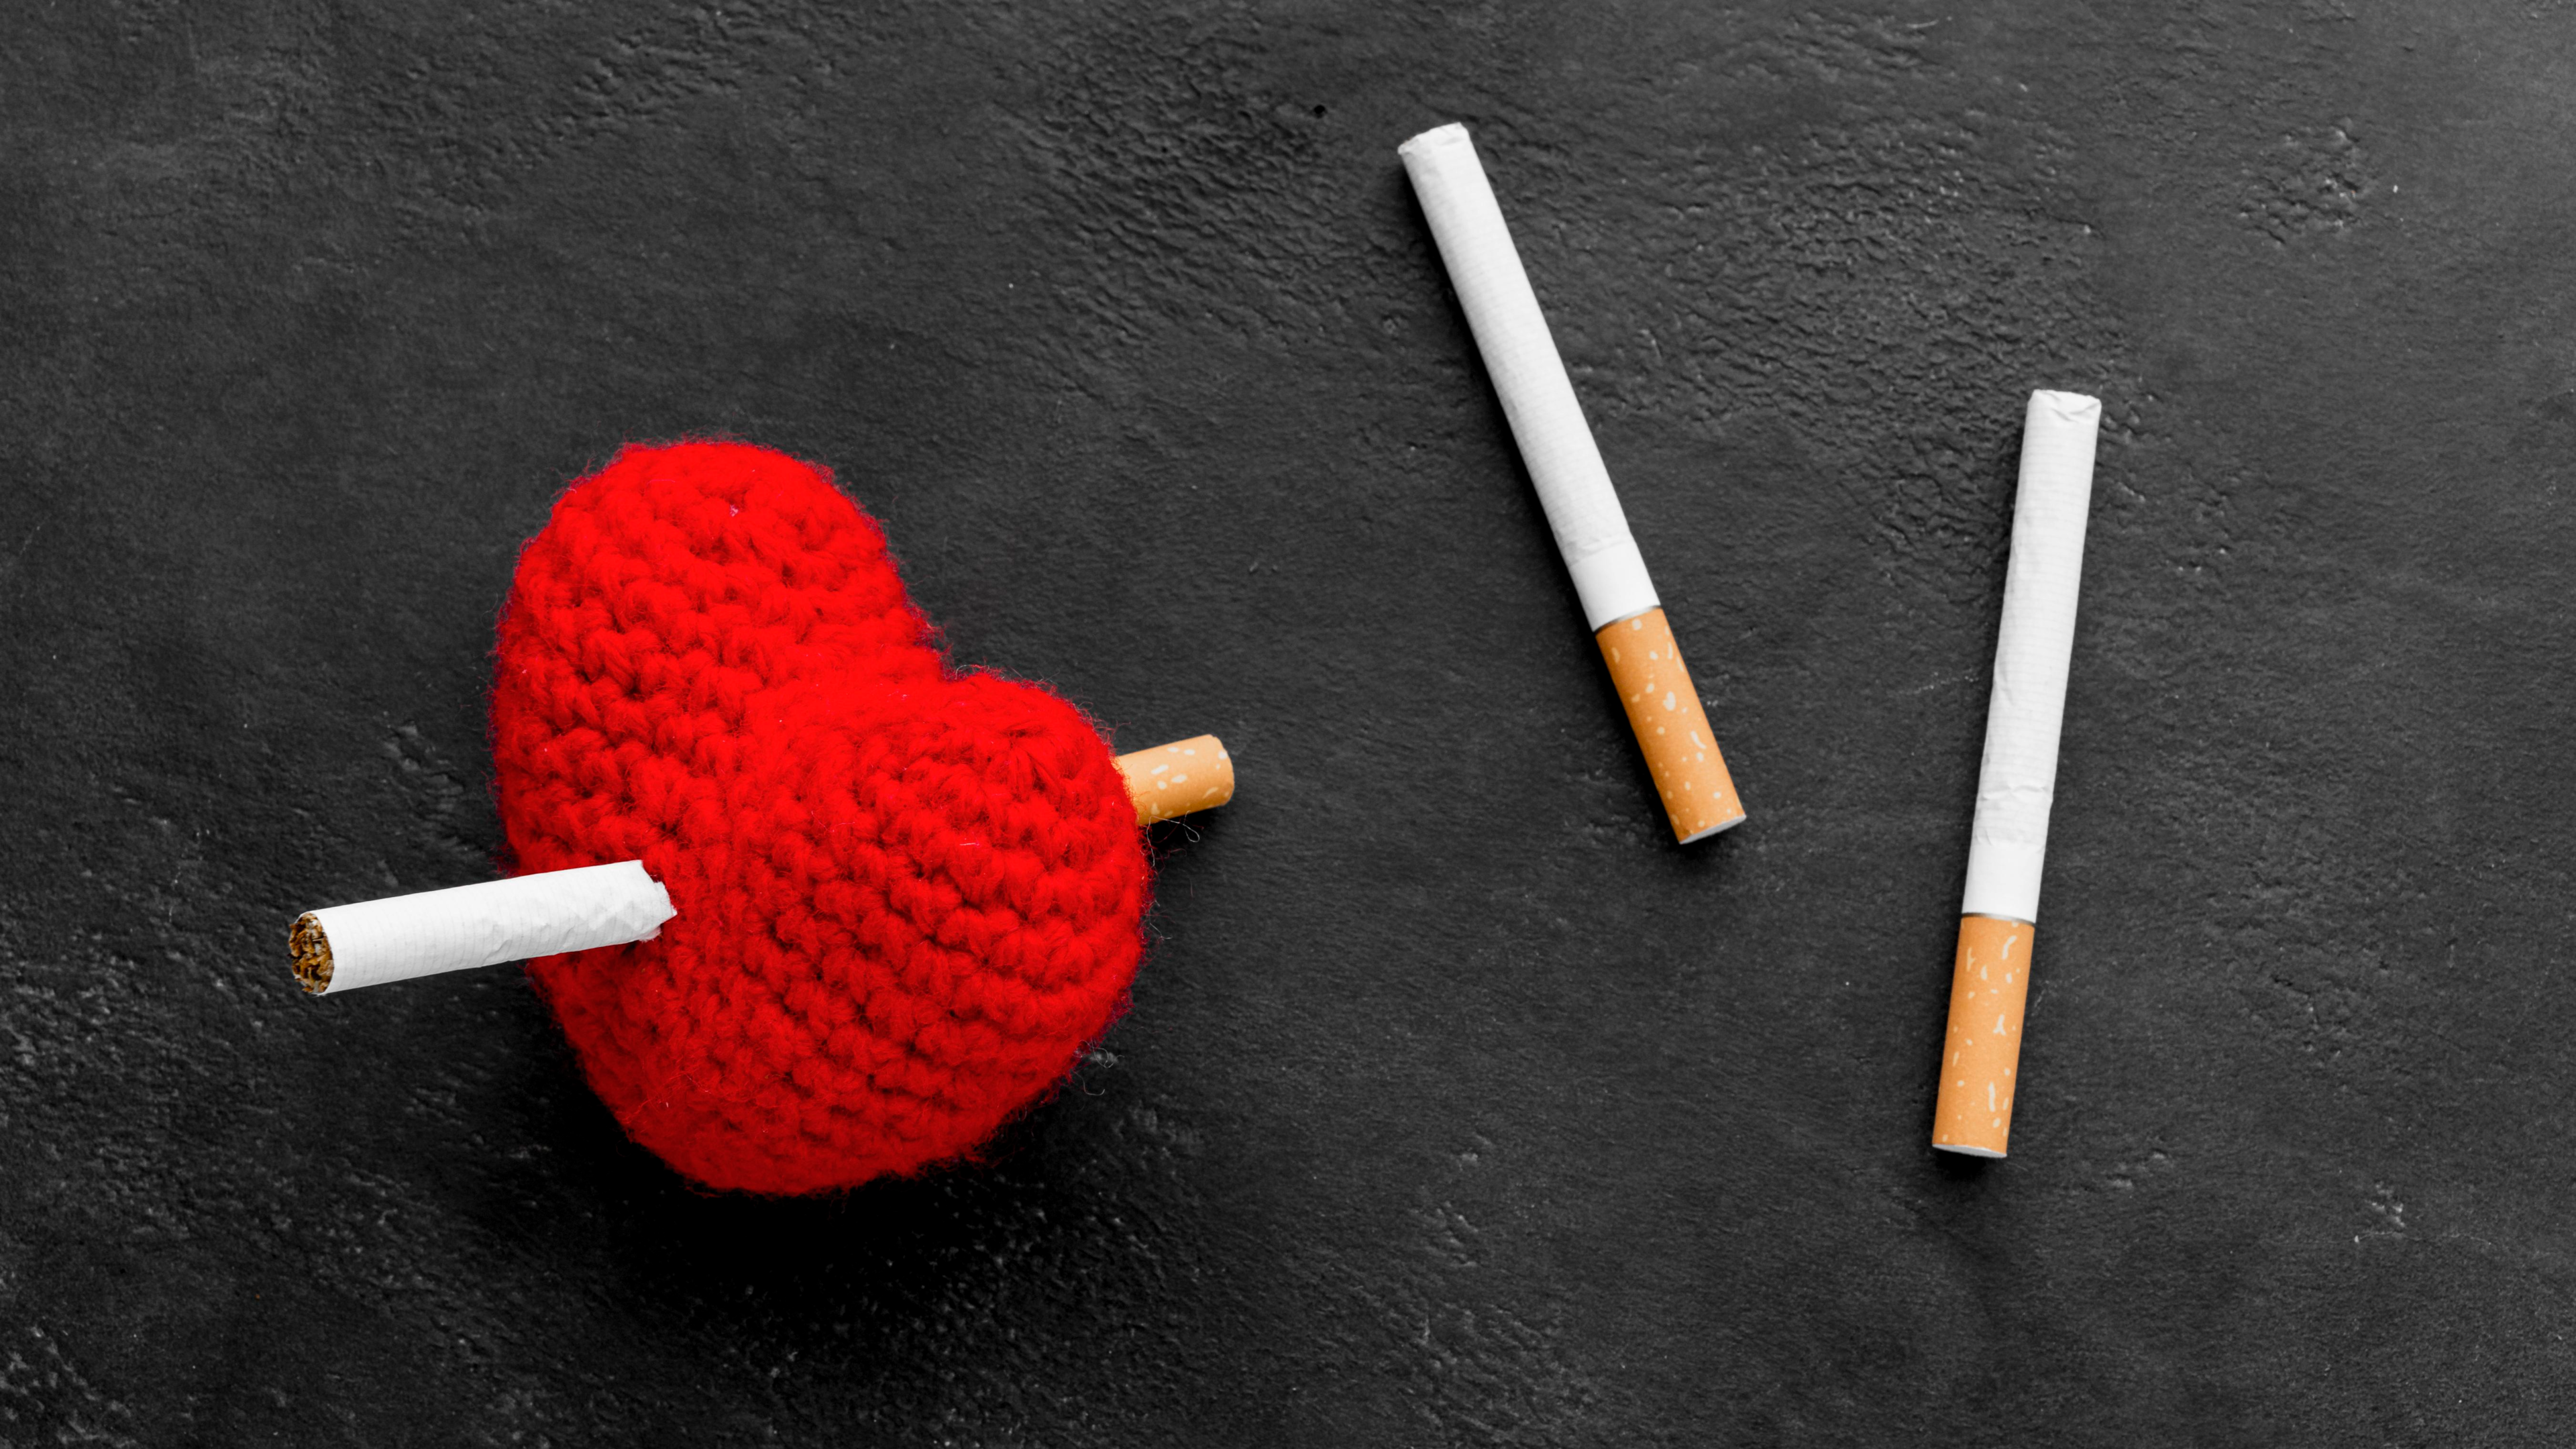 Smoking can do hell with your heart.